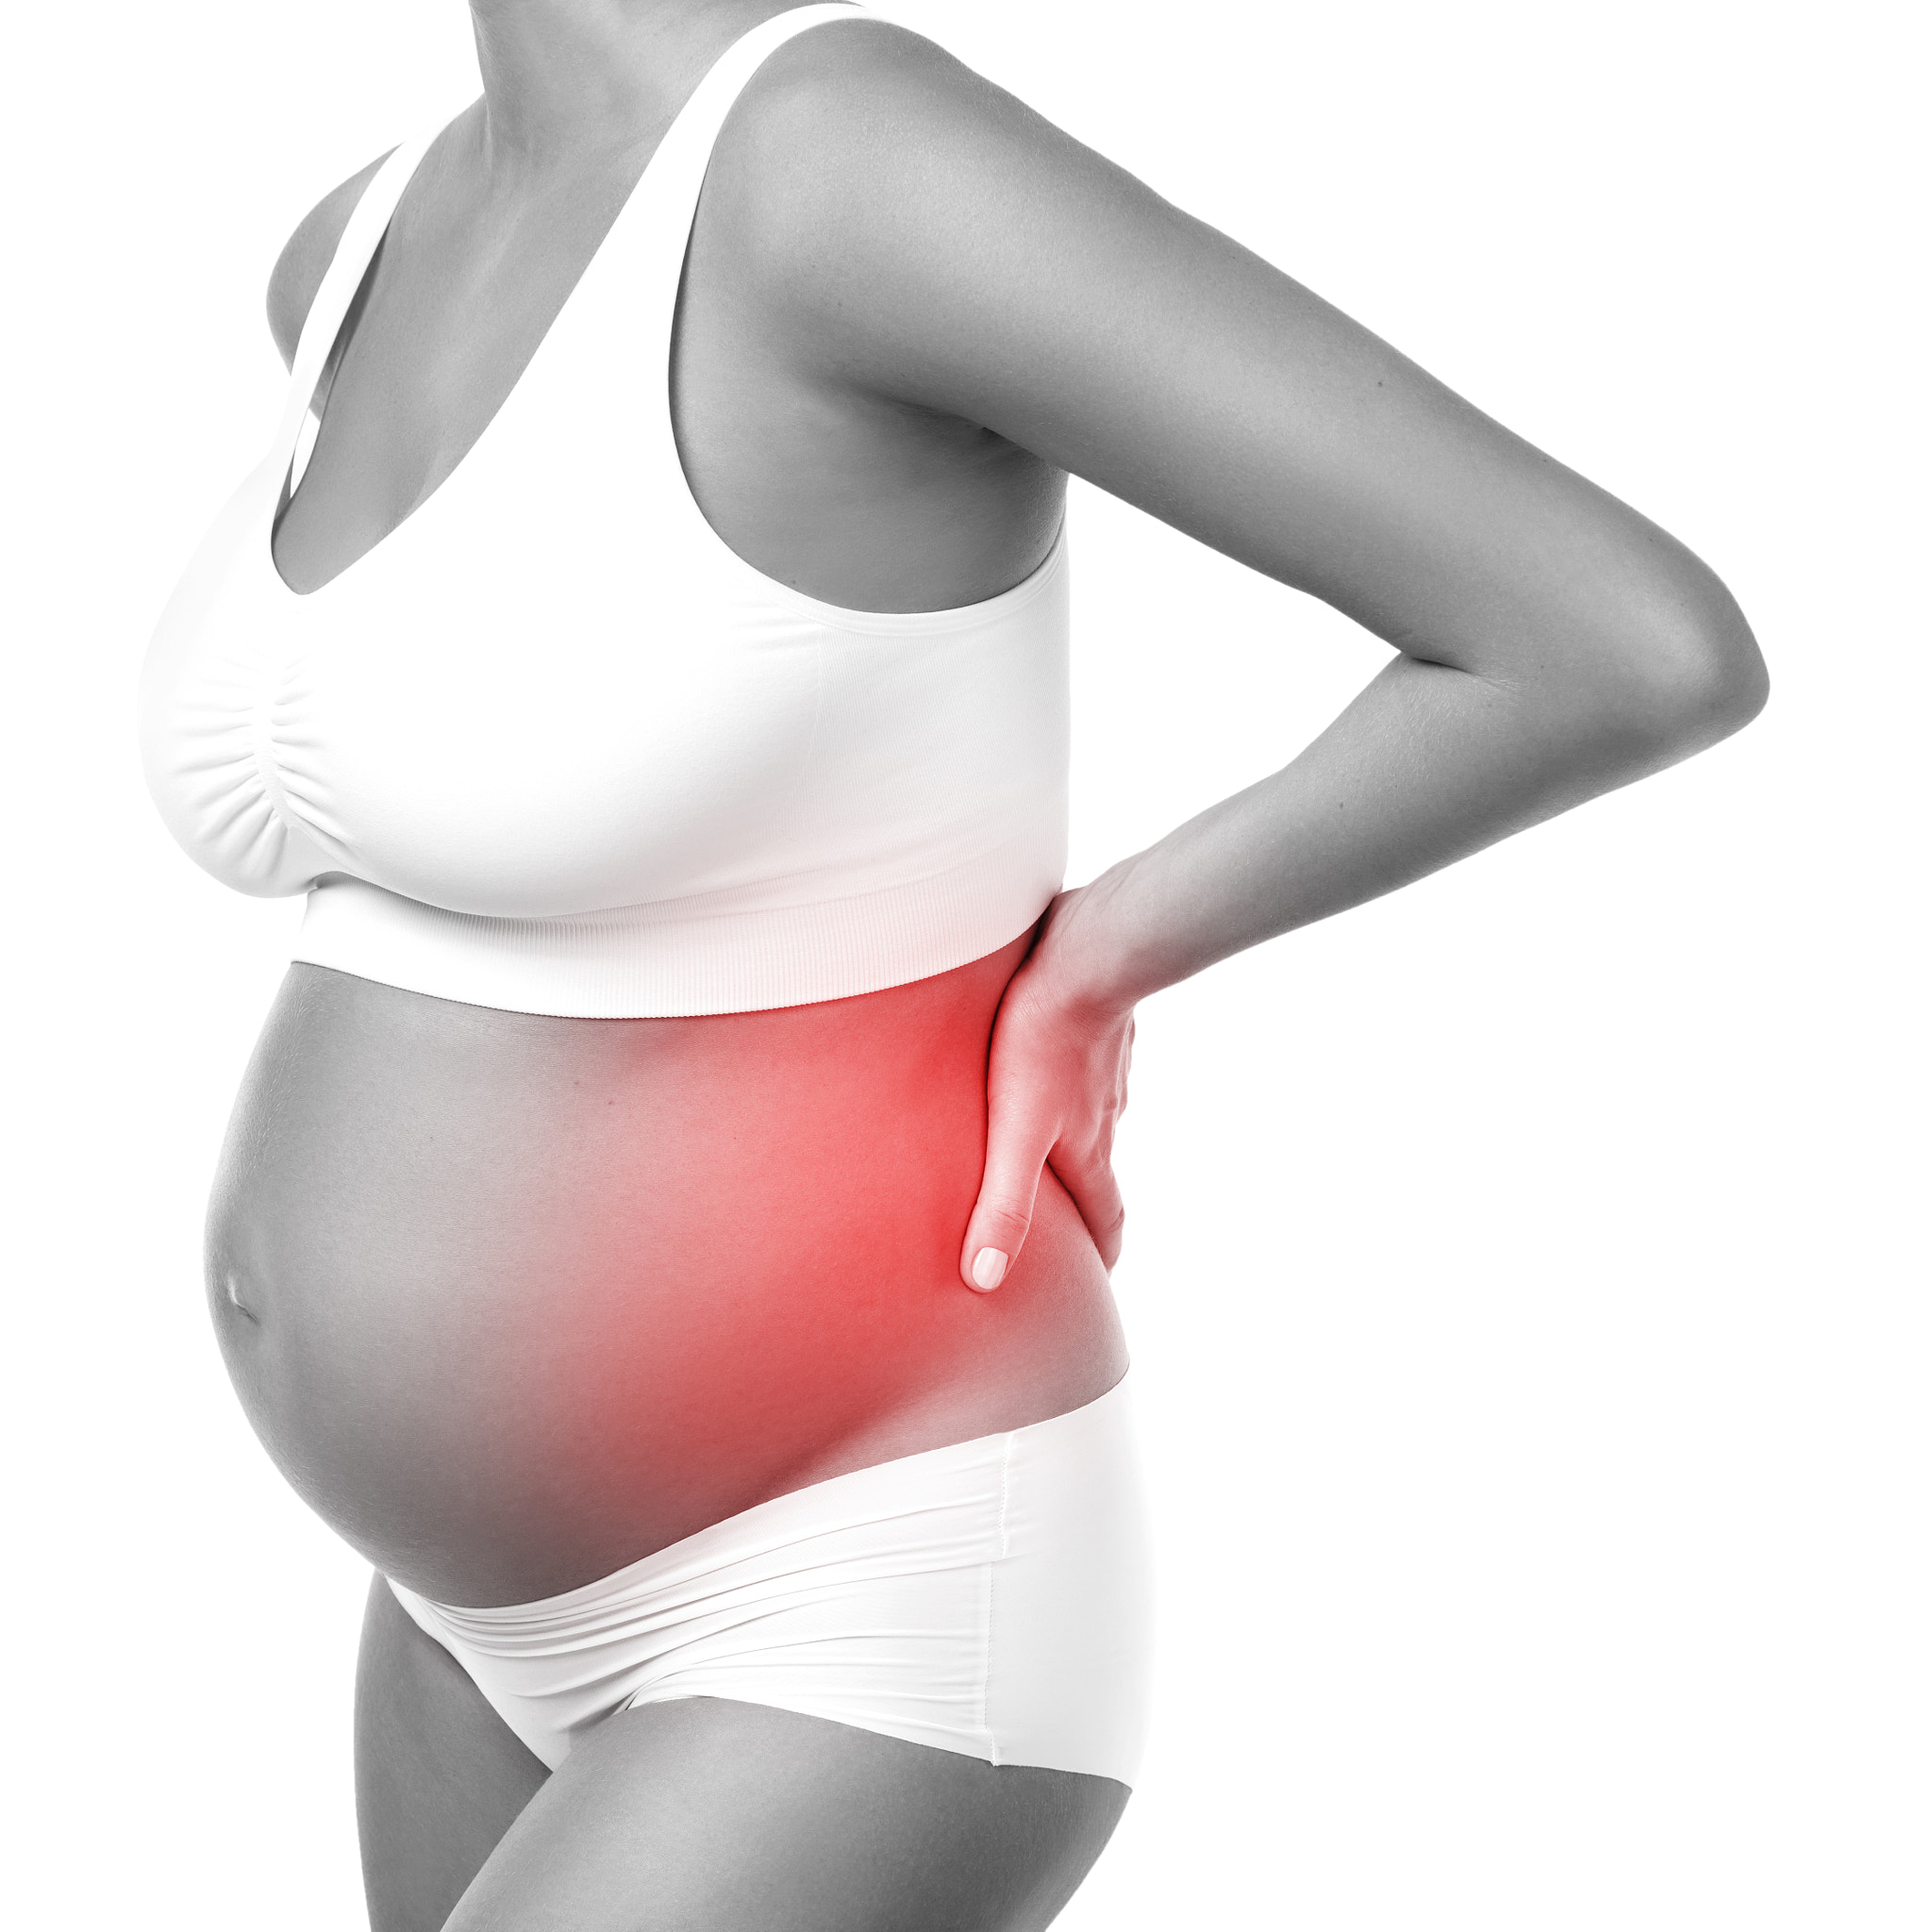 Pregnant woman has pain in her lower back or problems with kidneys